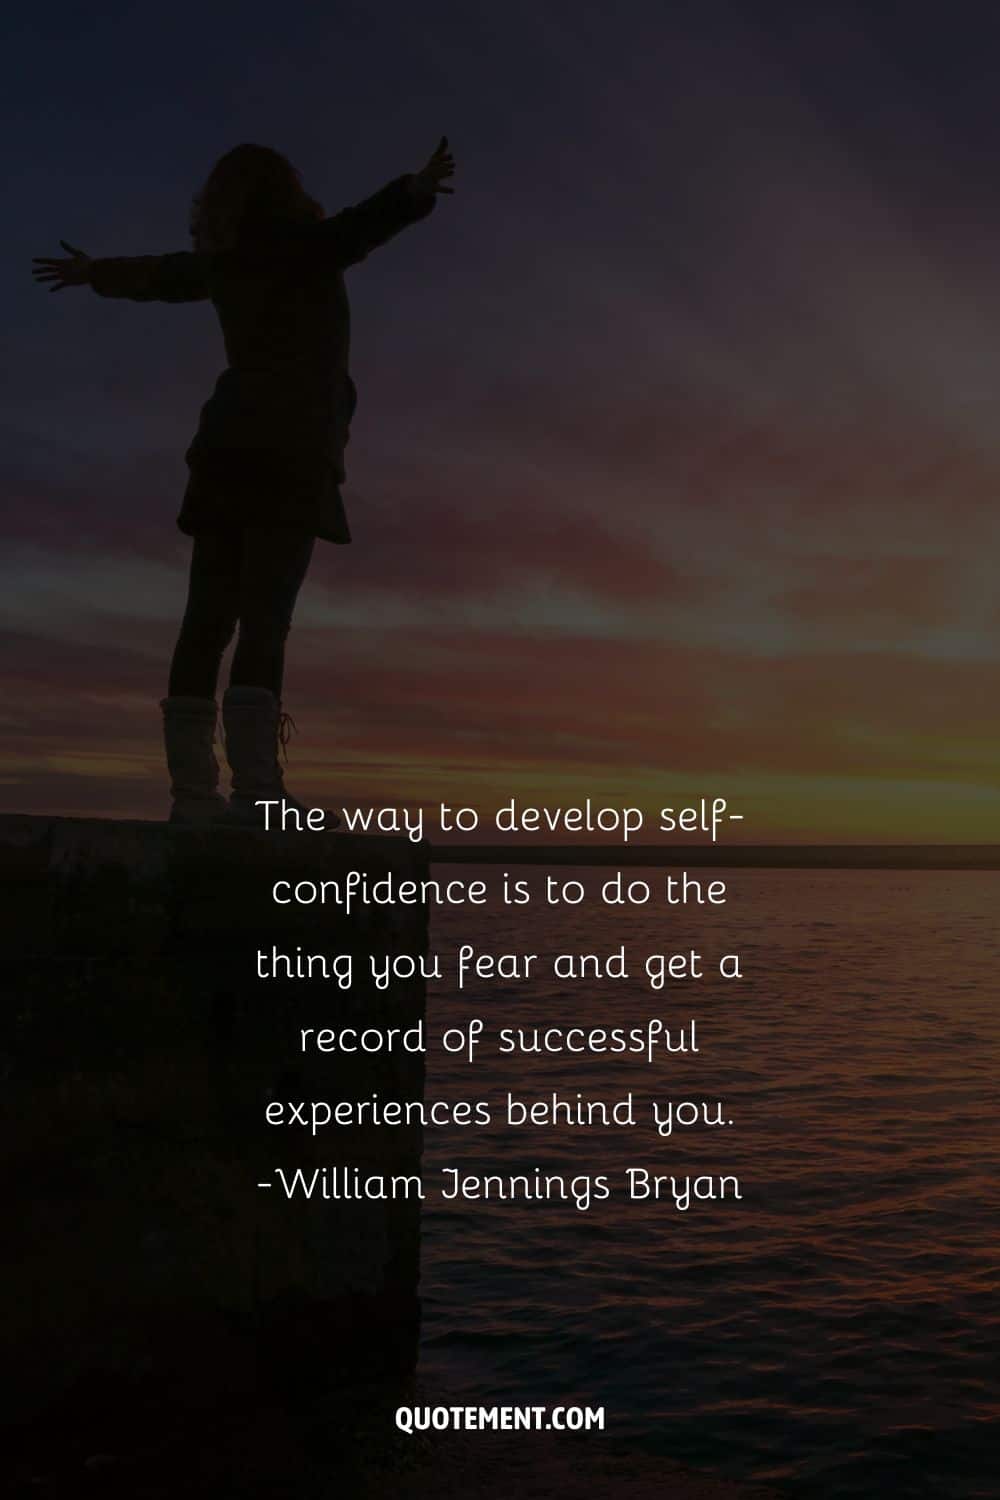 The way to develop self-confidence is to do the thing you fear and get a record of successful experiences behind you